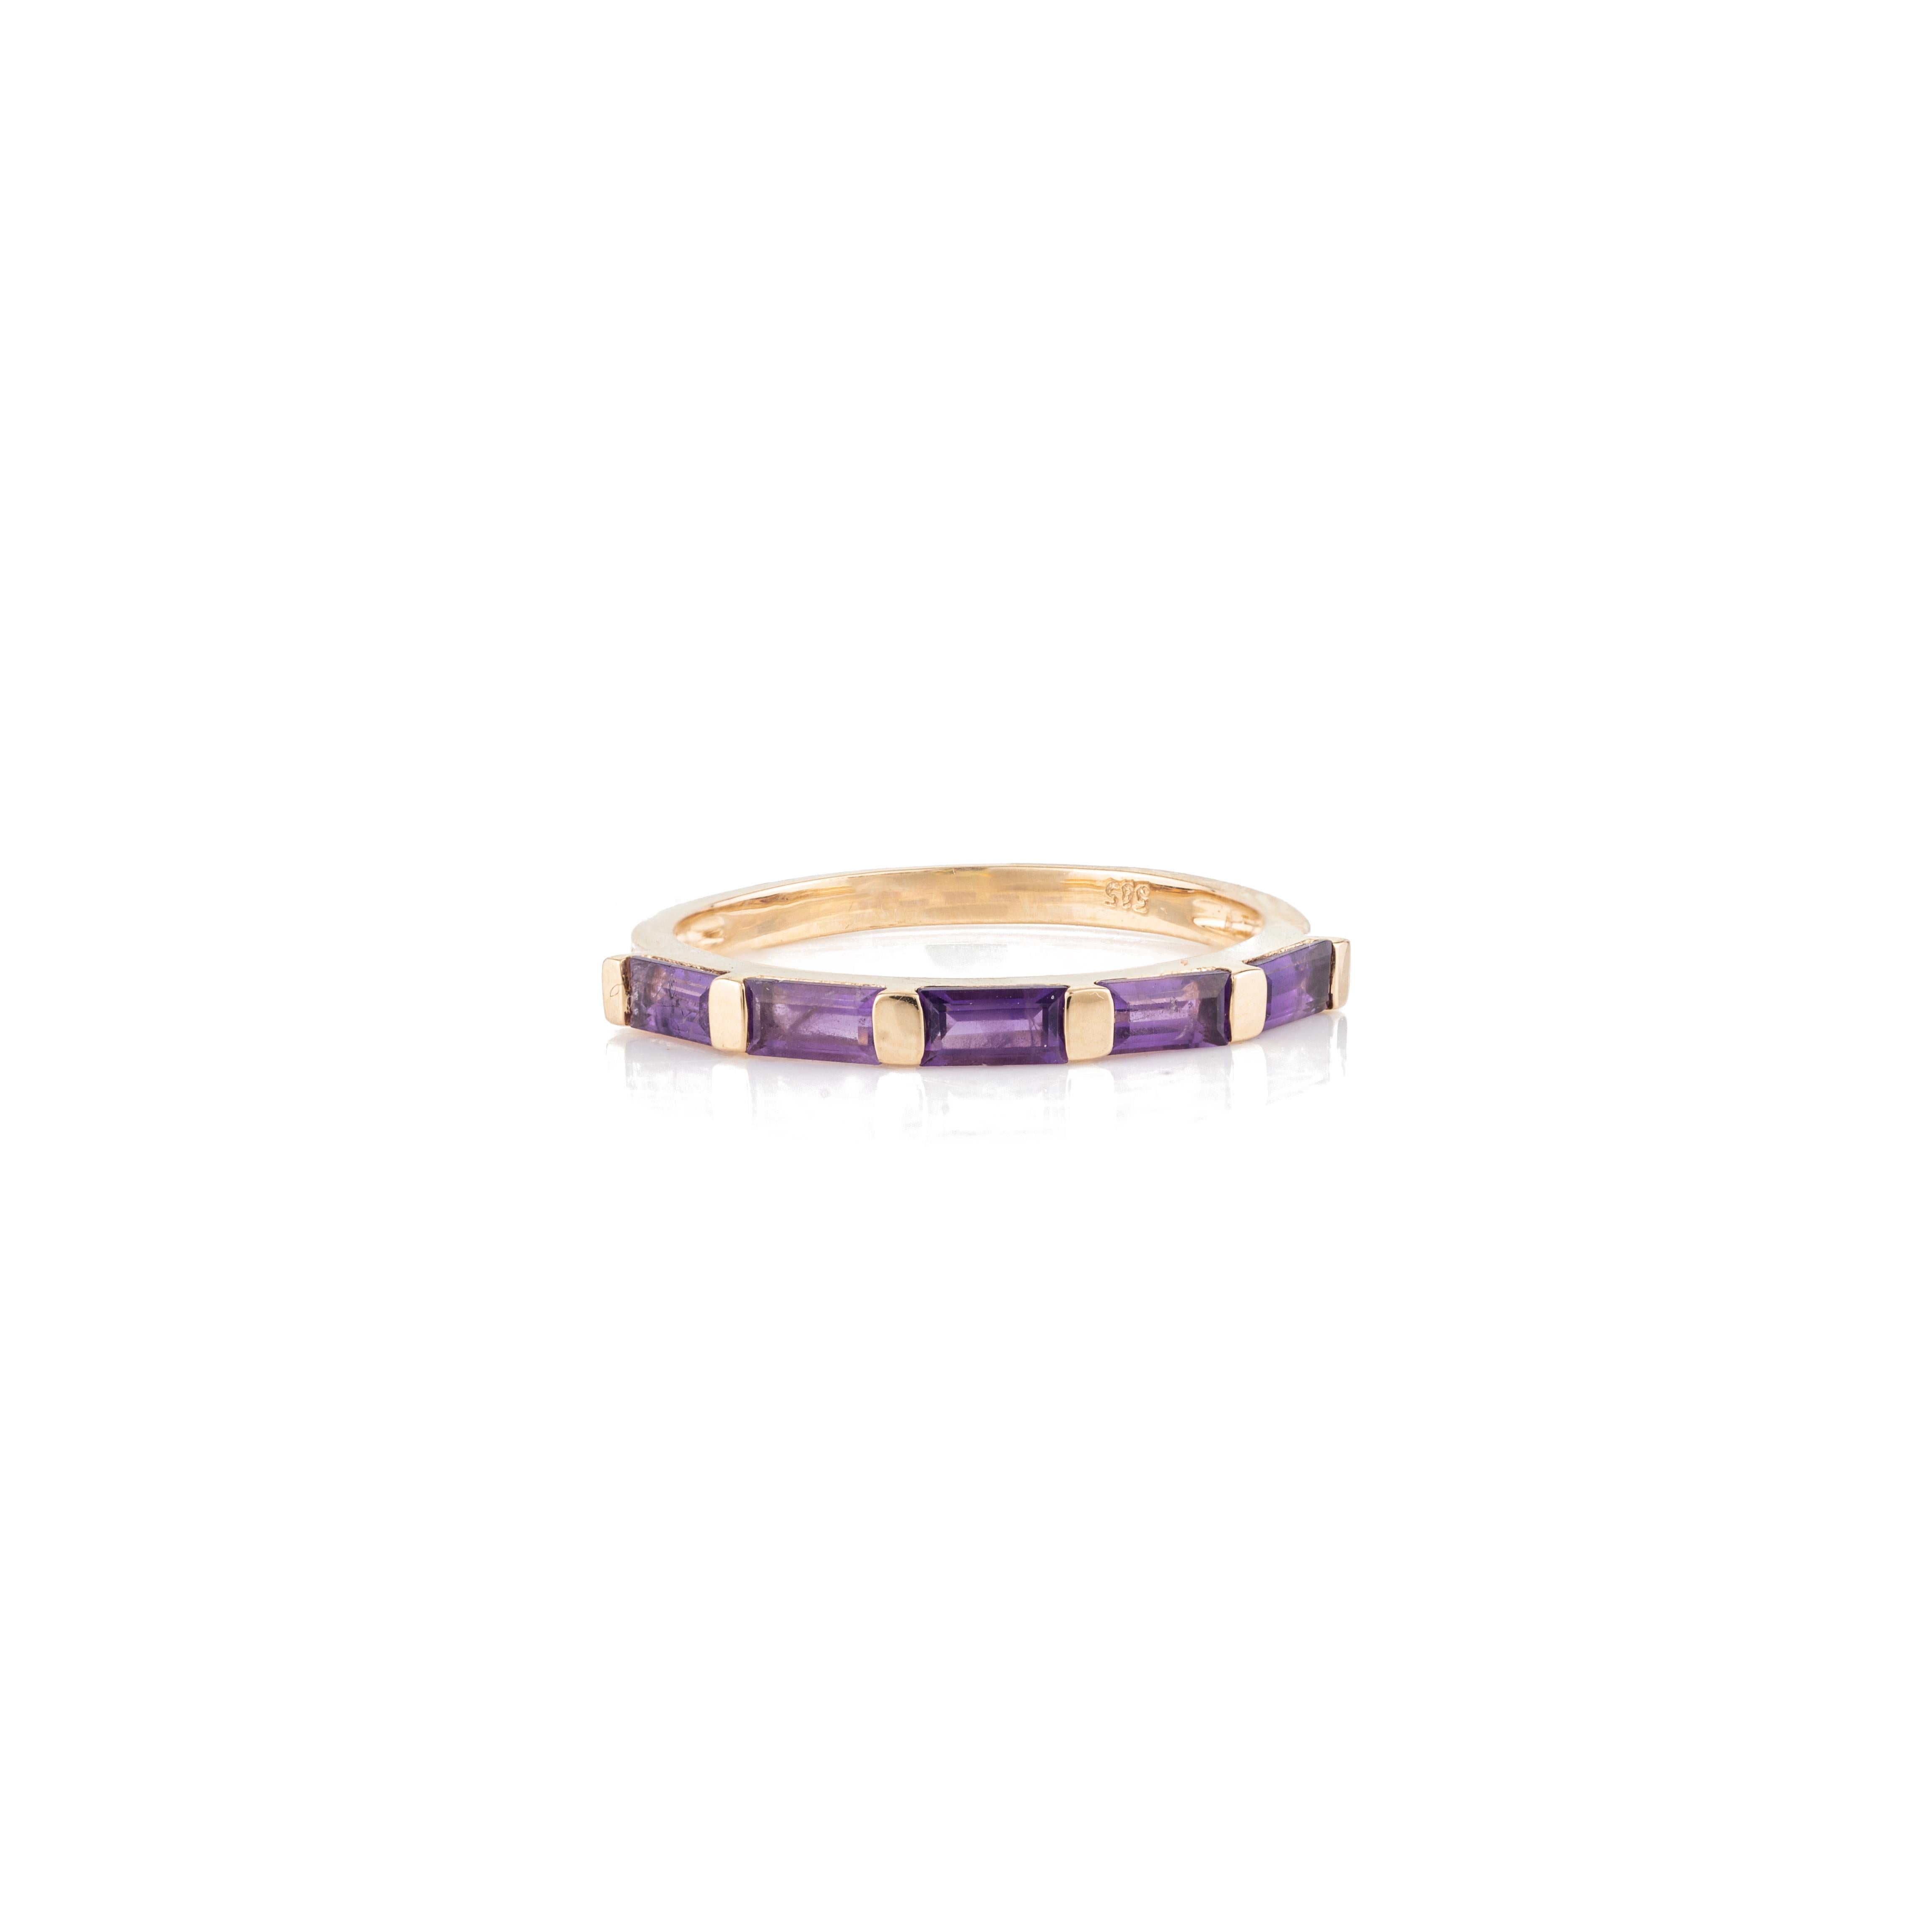 For Sale:  14k Yellow Gold Stackable Amethyst Half Band Ring Gift for Her 5